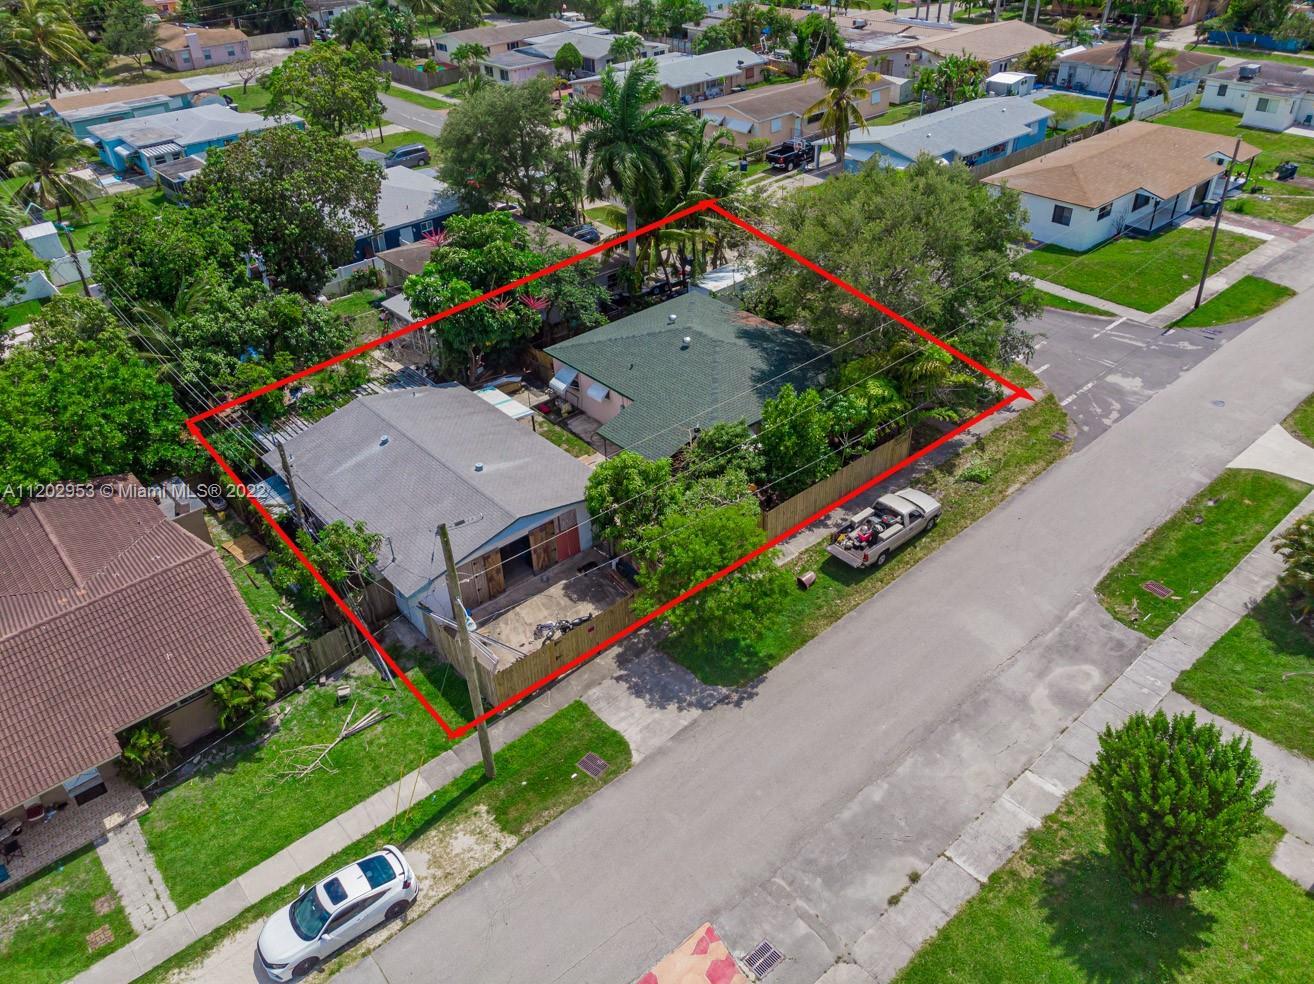 YES!!! AS YOU CAN SEE, THIS FENCED-IN CORNER PROPERTY HAS A HUGE 1,036 sf DETACHED GARAGE ALMOST AS 